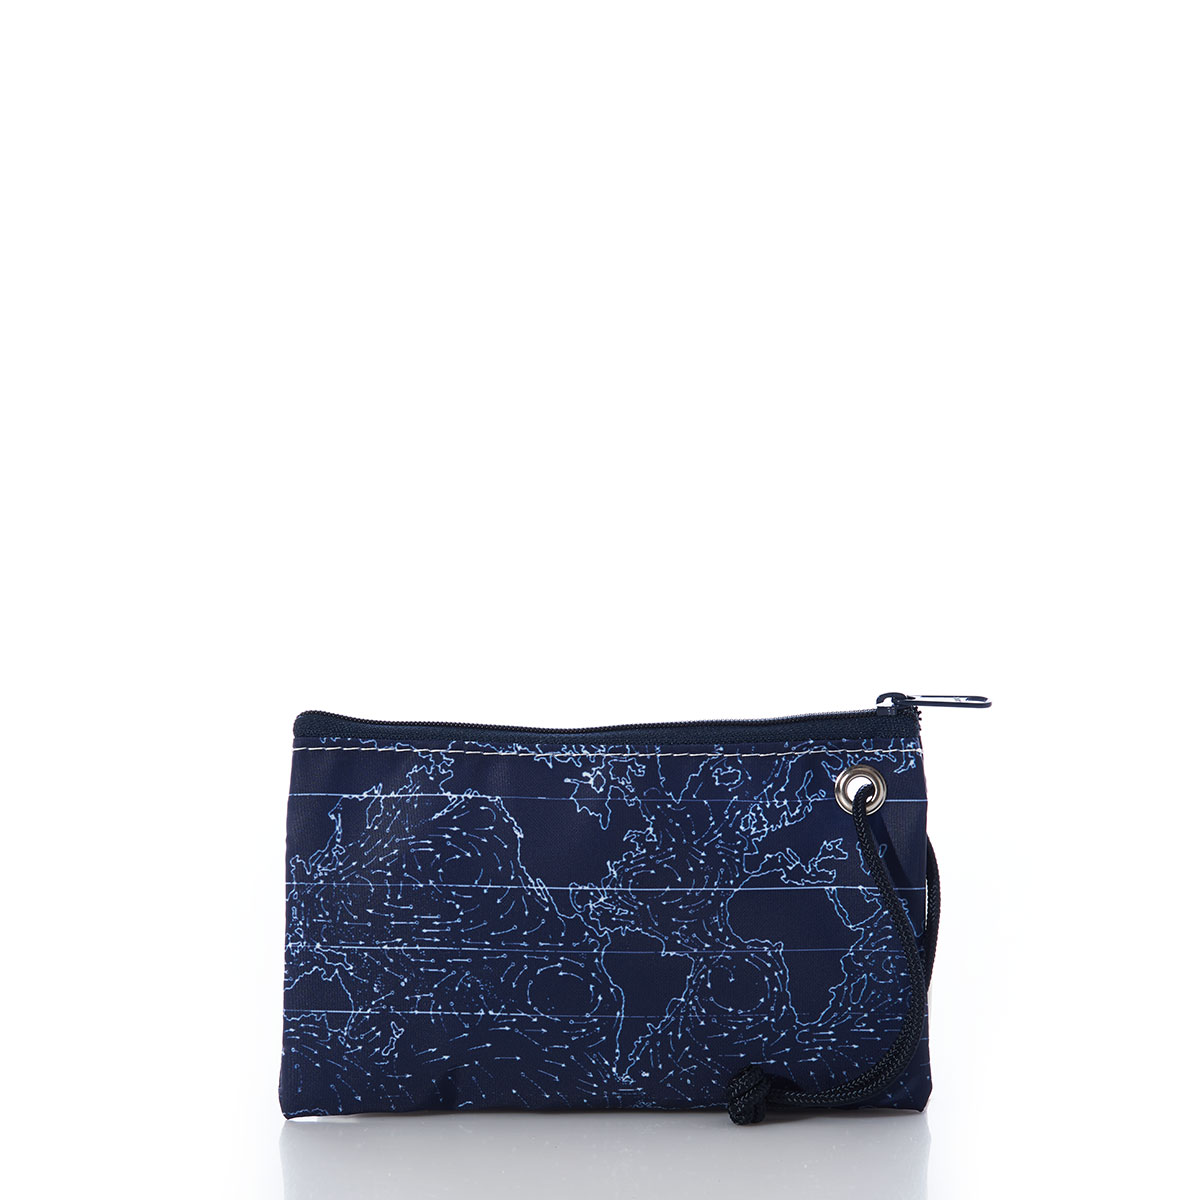 white arrows showing currents swirl around white outlined continents on a navy recycled sail cloth wristlet with navy zipper and strap